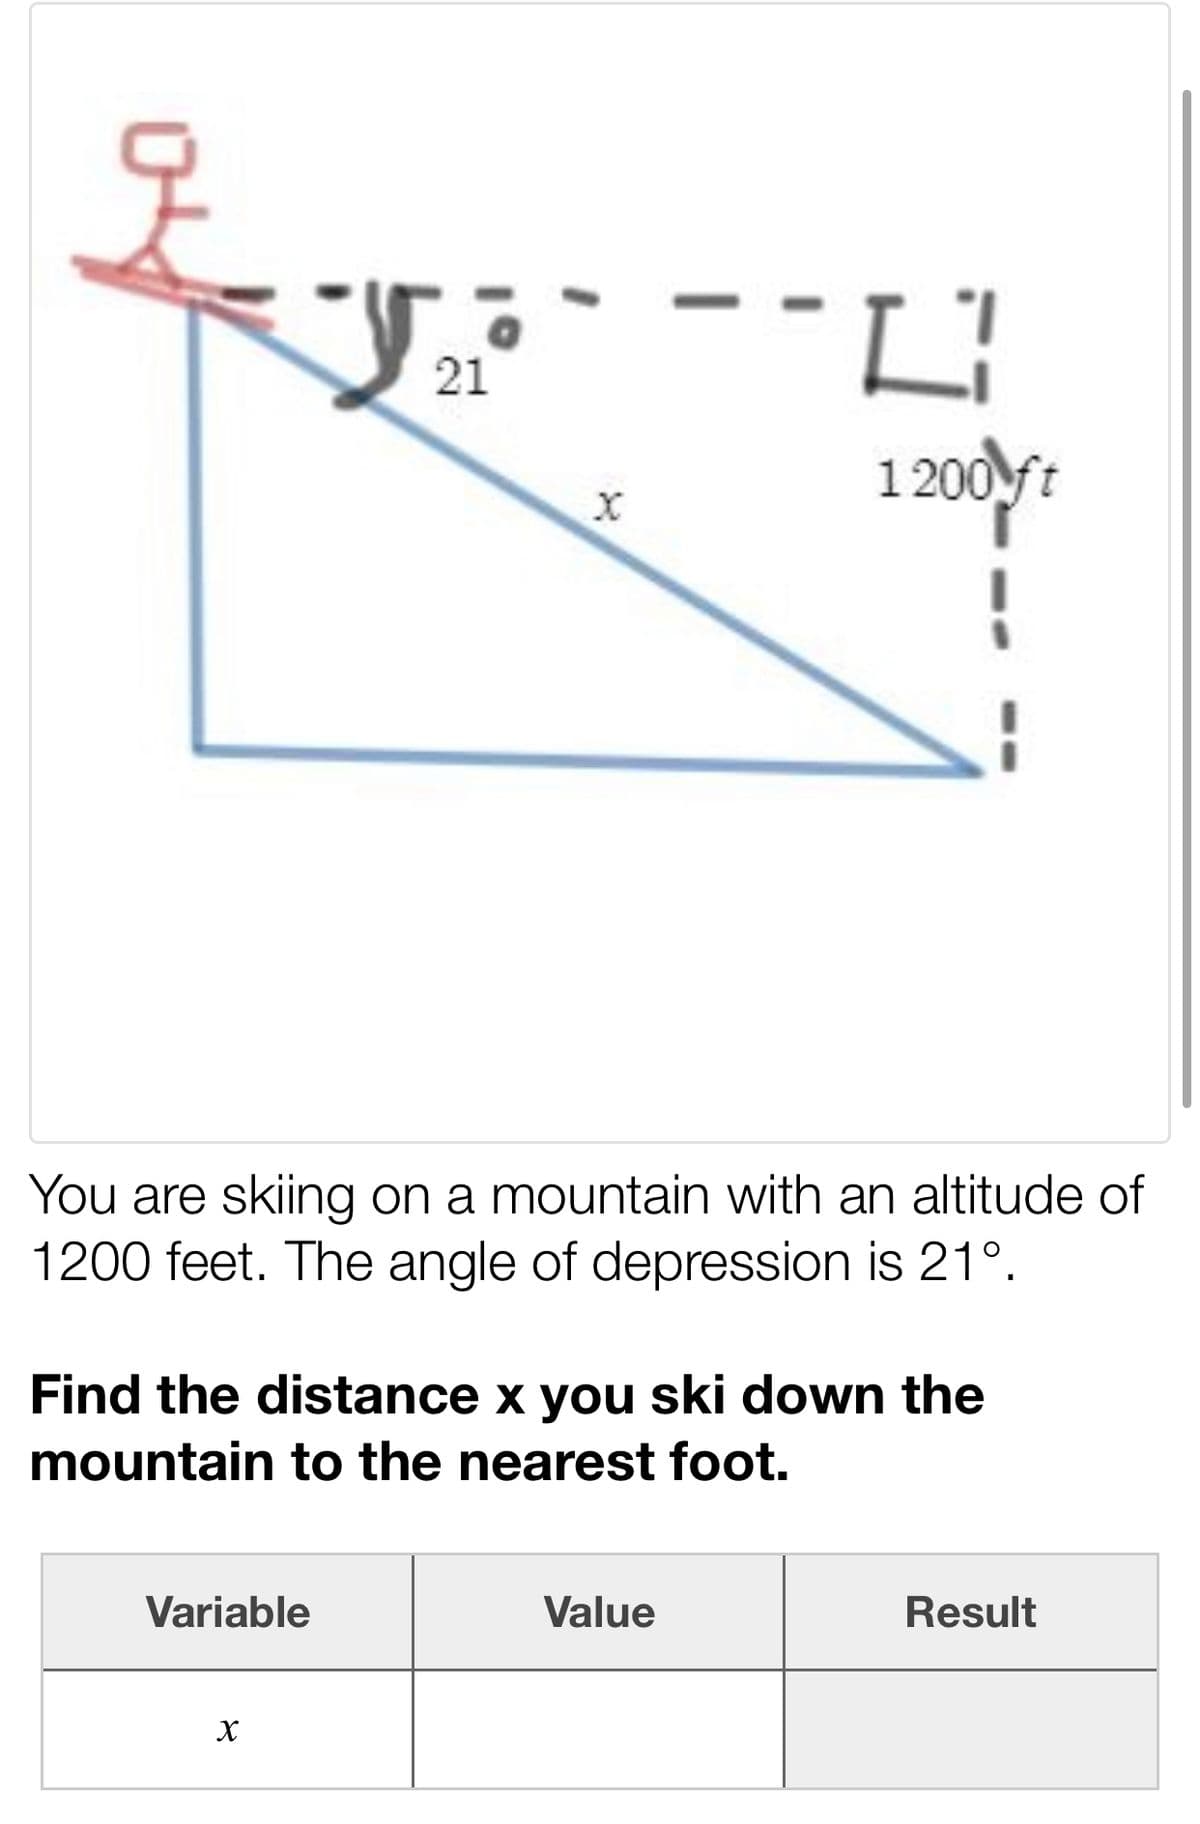 21
1200 ft
!
You are skiing on a mountain with an altitude of
1200 feet. The angle of depression is 21°.
Find the distance x you ski down the
mountain to the nearest foot.
Variable
Value
Result
